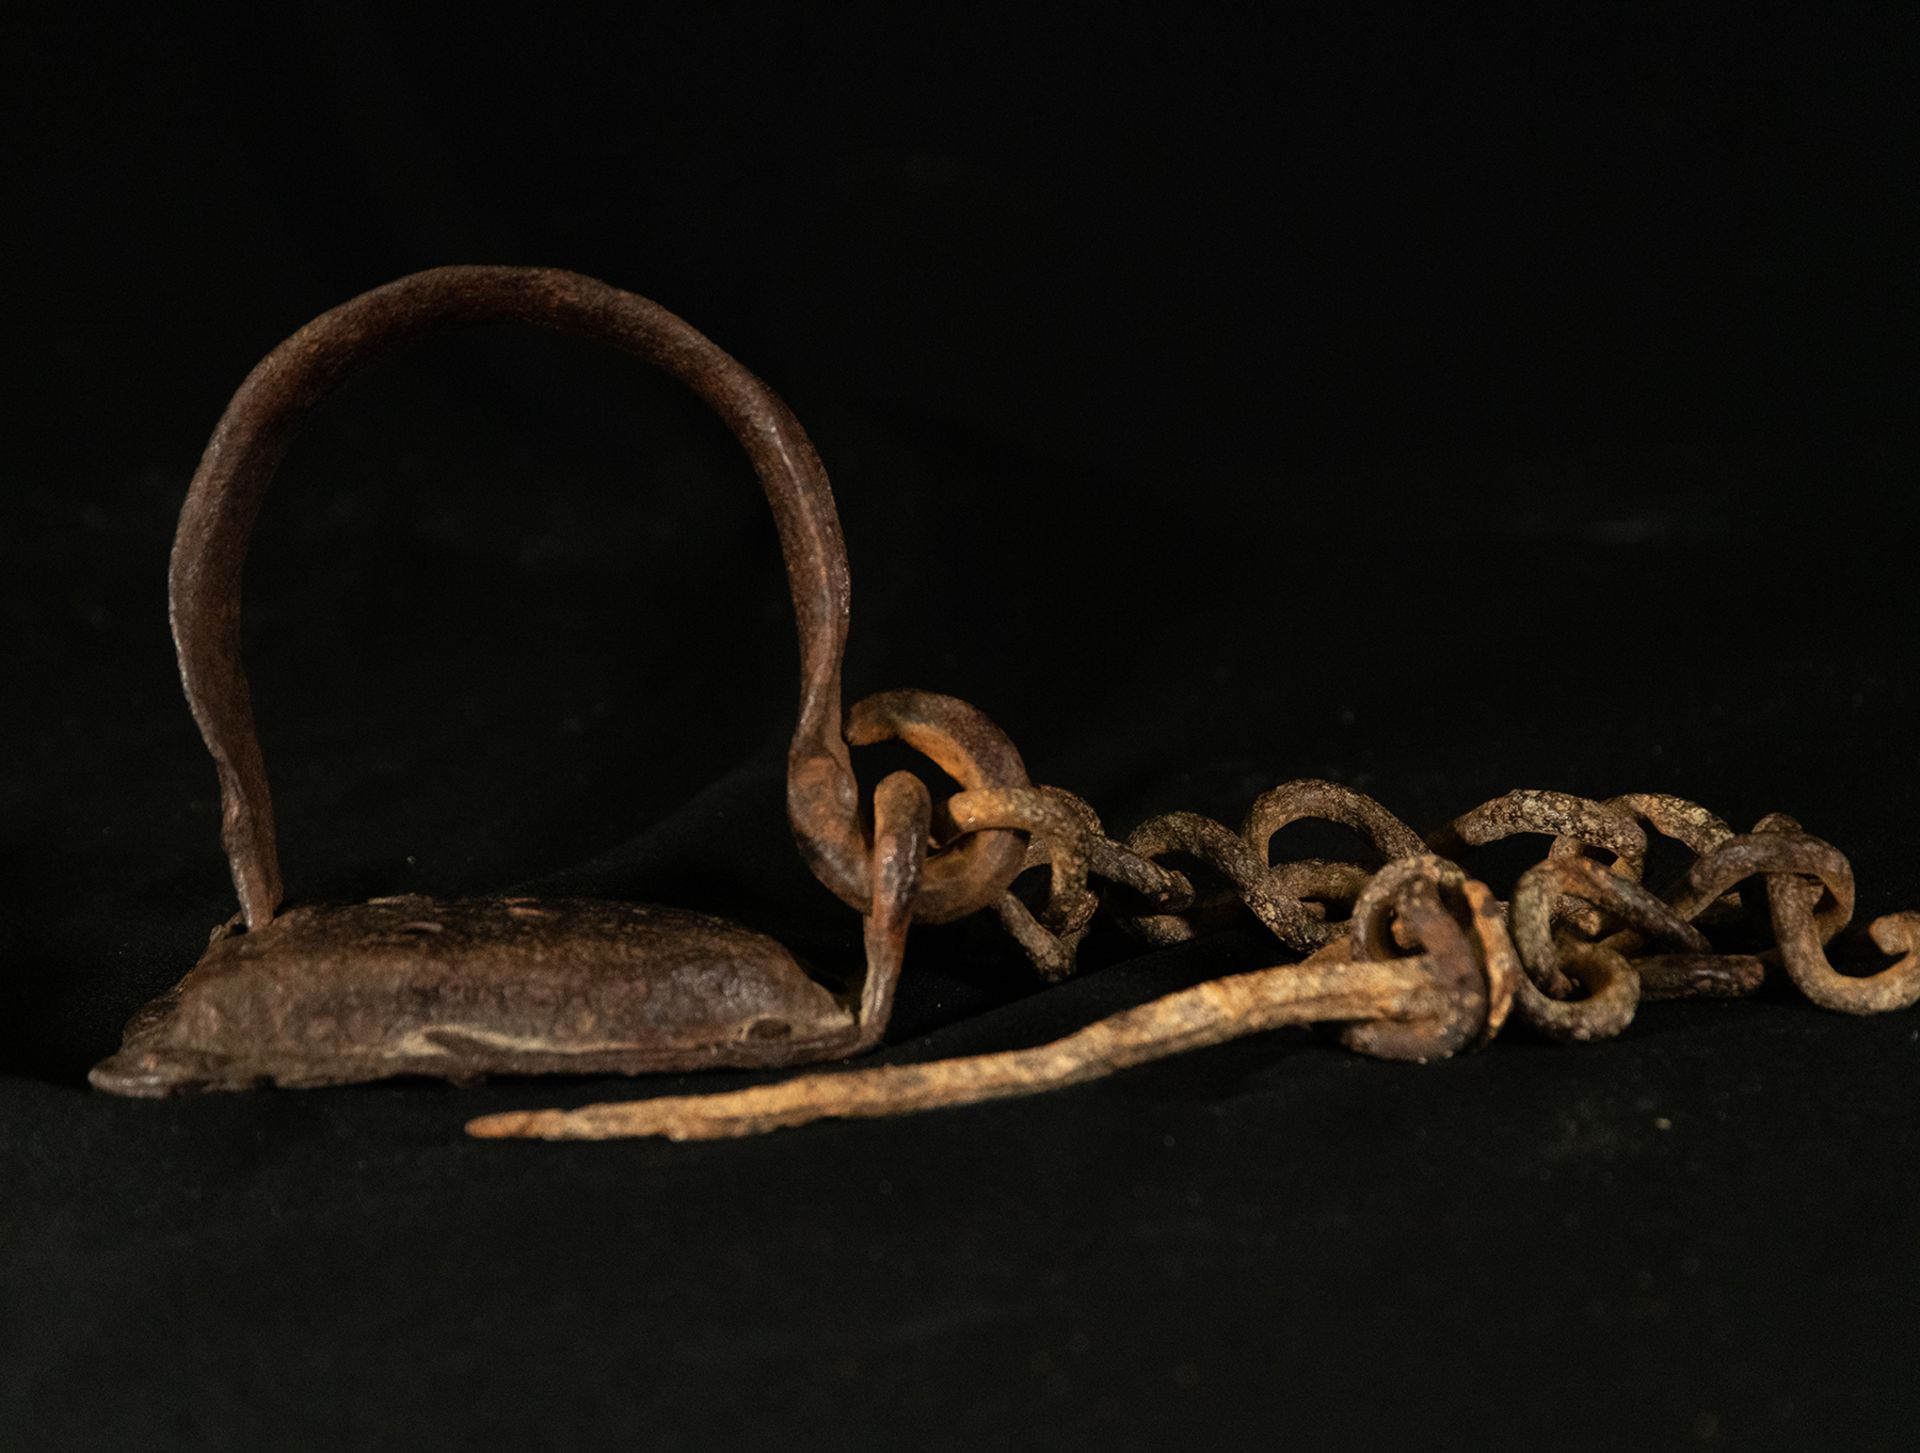 Rare Rack for slave or prisoner condemned to row on ships with nail. 17th century